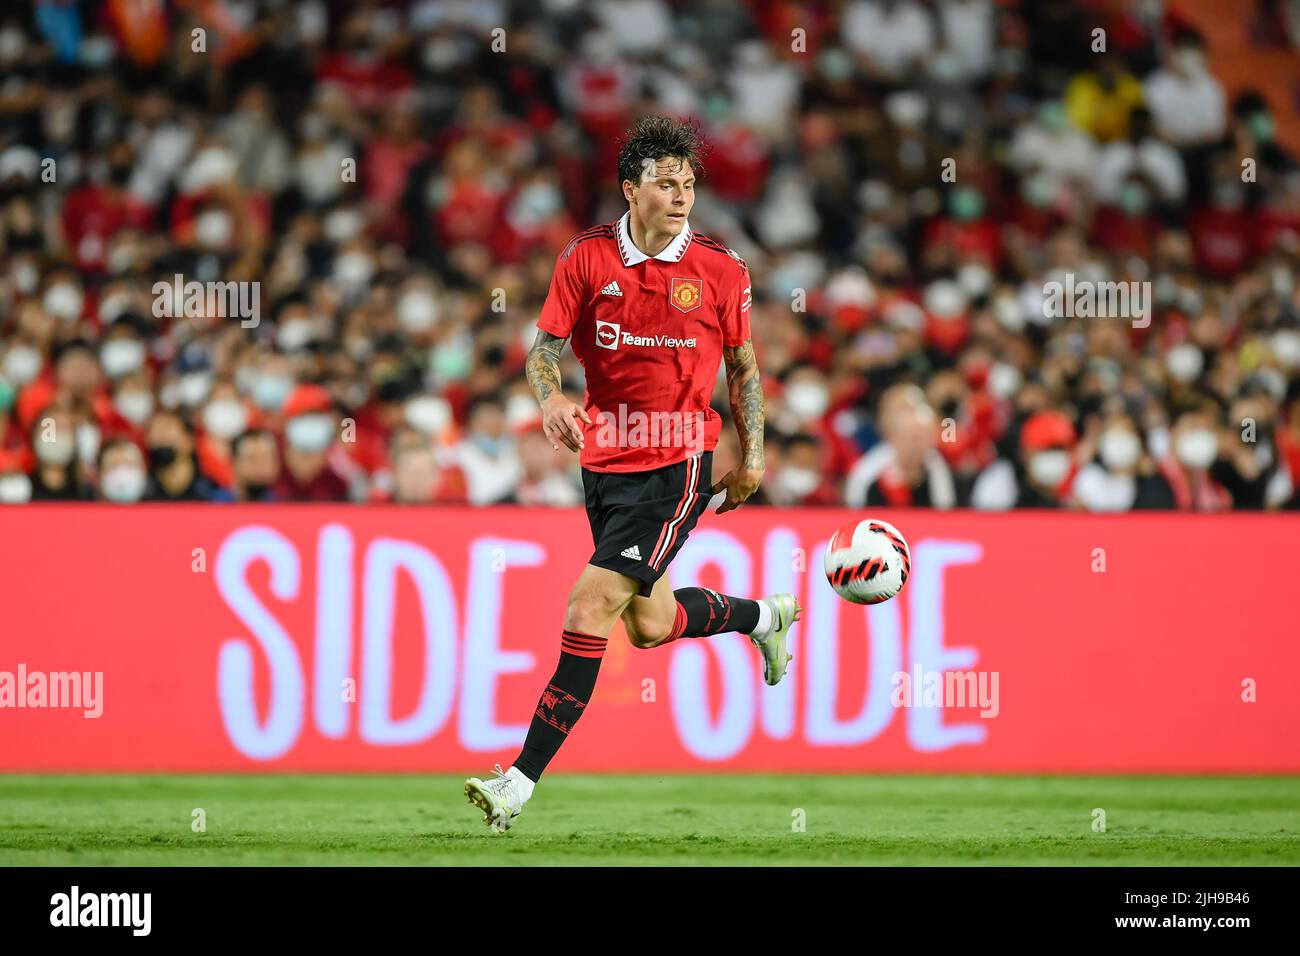 Victor Lindelof of Manchester United seen in action during the preseason match between Manchester United against Liverpool at Rajamangala stadium.(Final score; Manchester United 4:0 Liverpool). Stock Photo